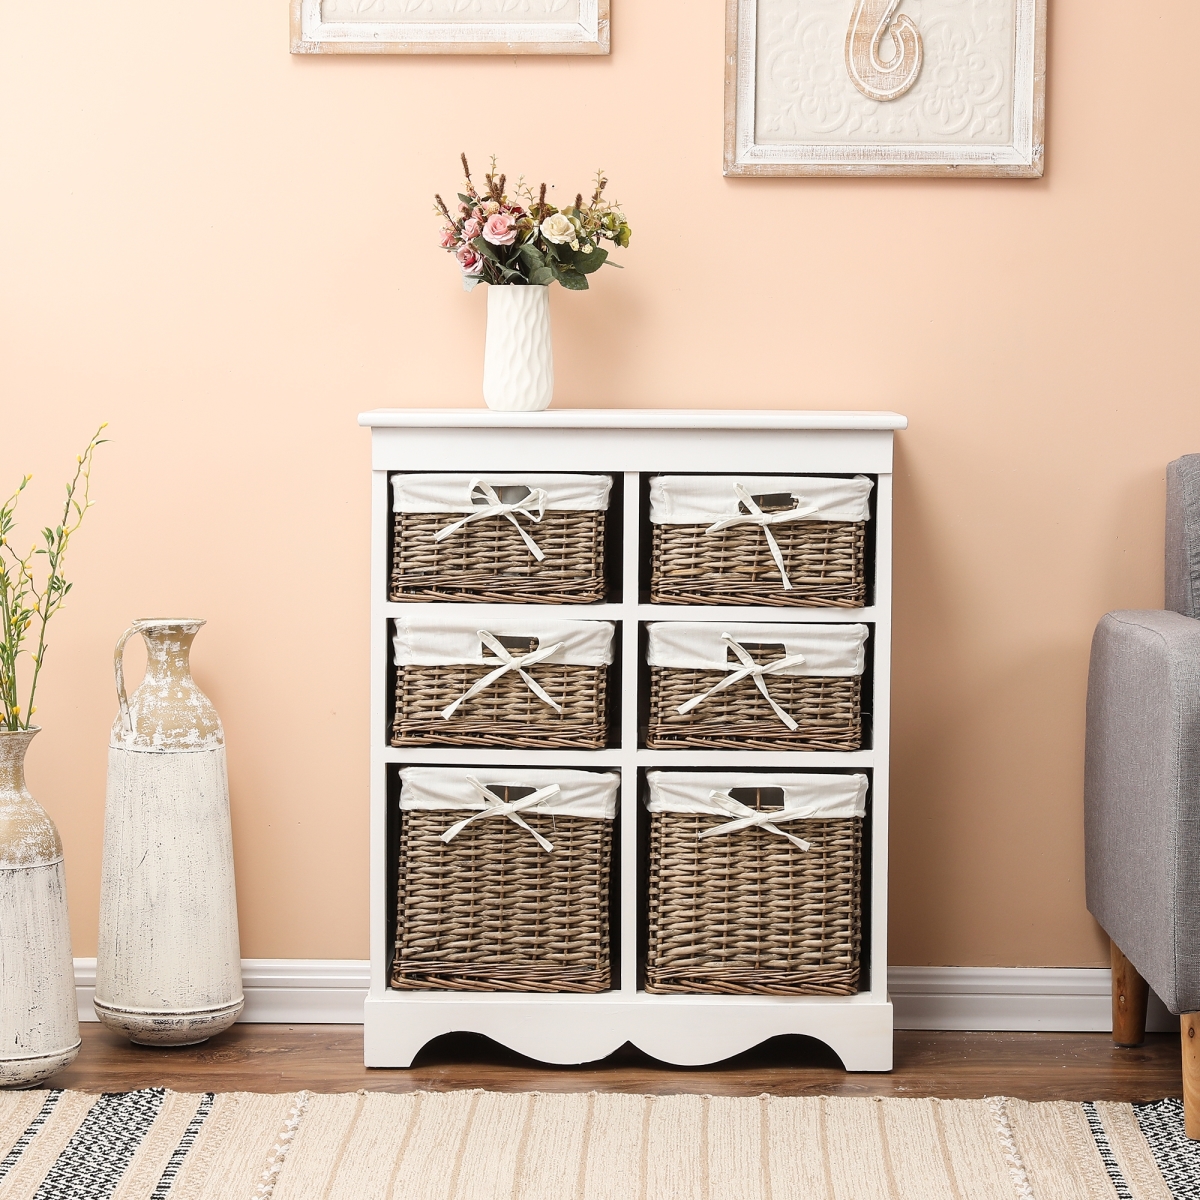 Whif912 30.1 In. White Wood Cabinet With 6-drawer Baskets